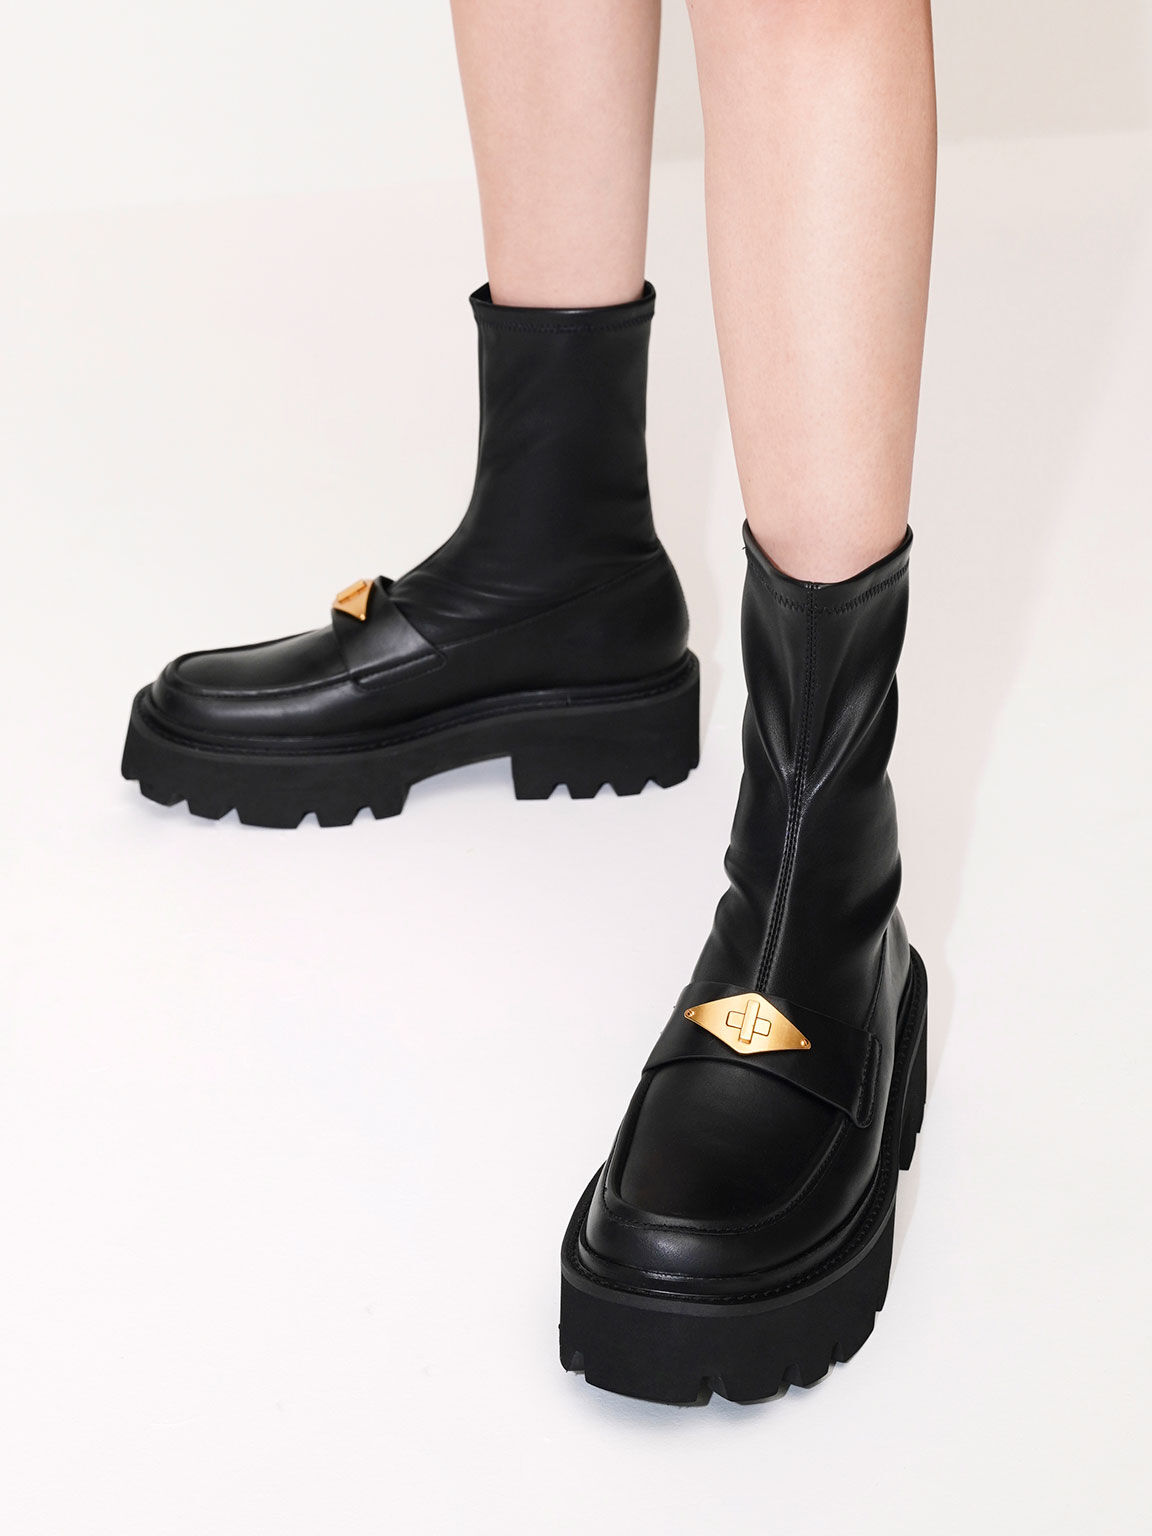 Women's Boots | Shop Exclusive Styles | CHARLES & KEITH UK